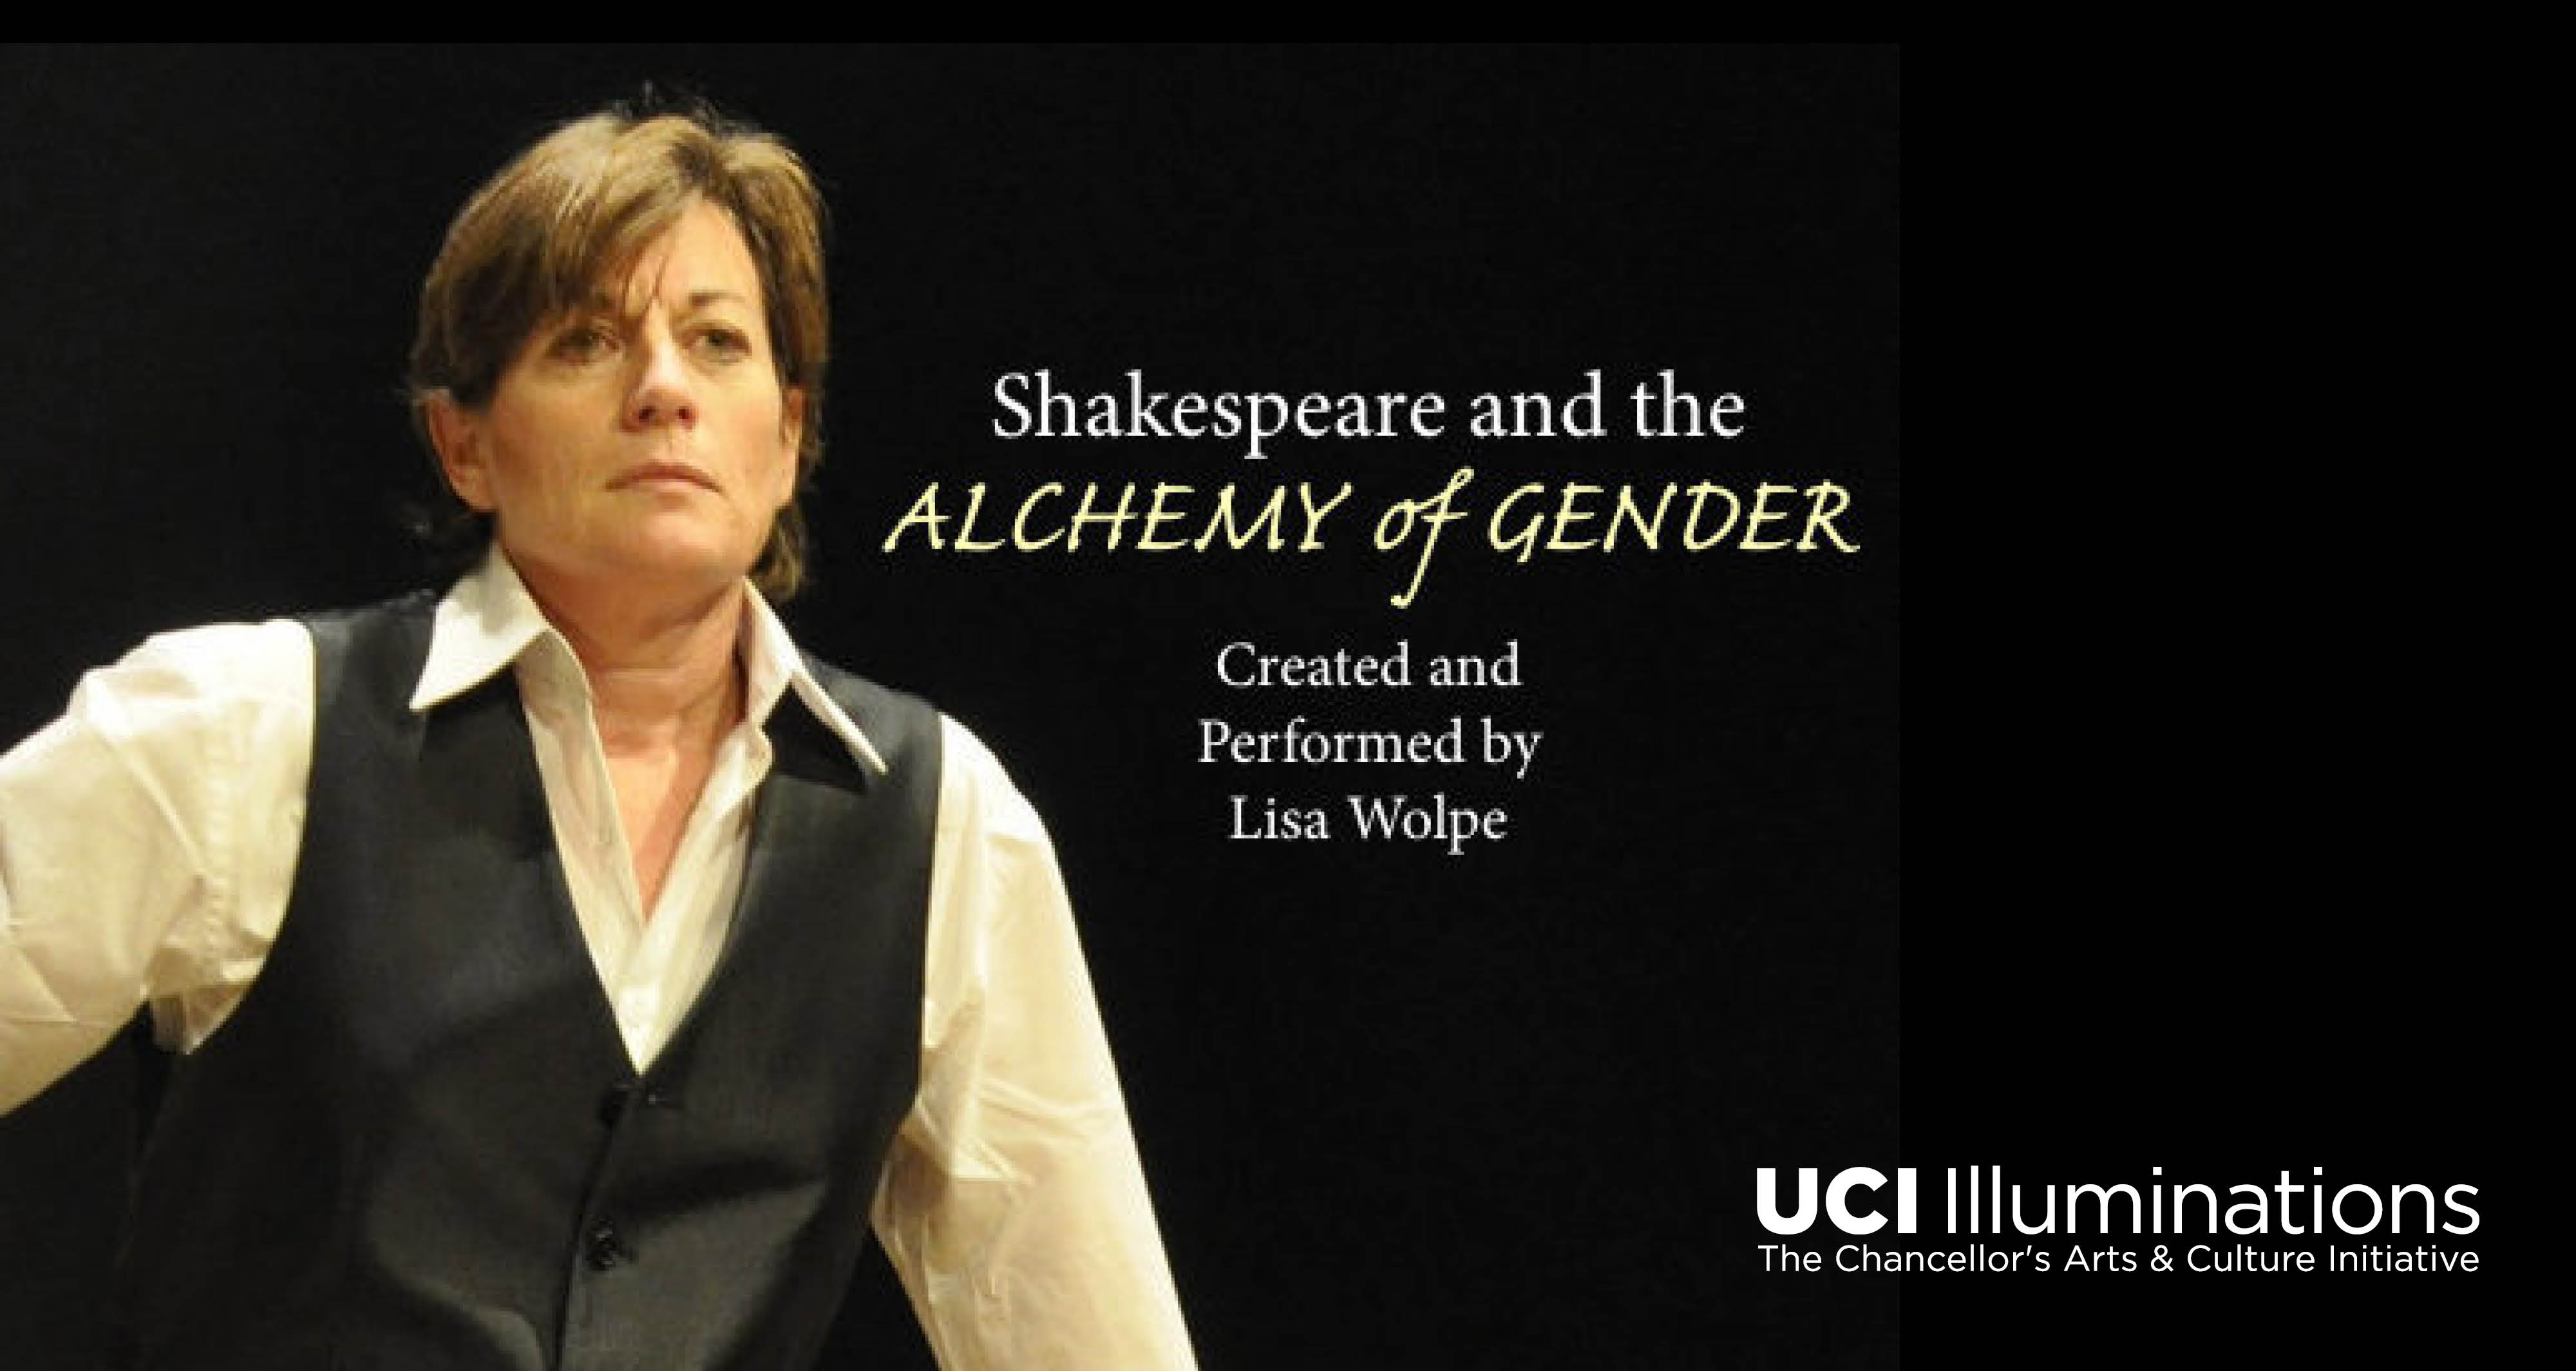 Shakespeare and the Alchemy of Gender